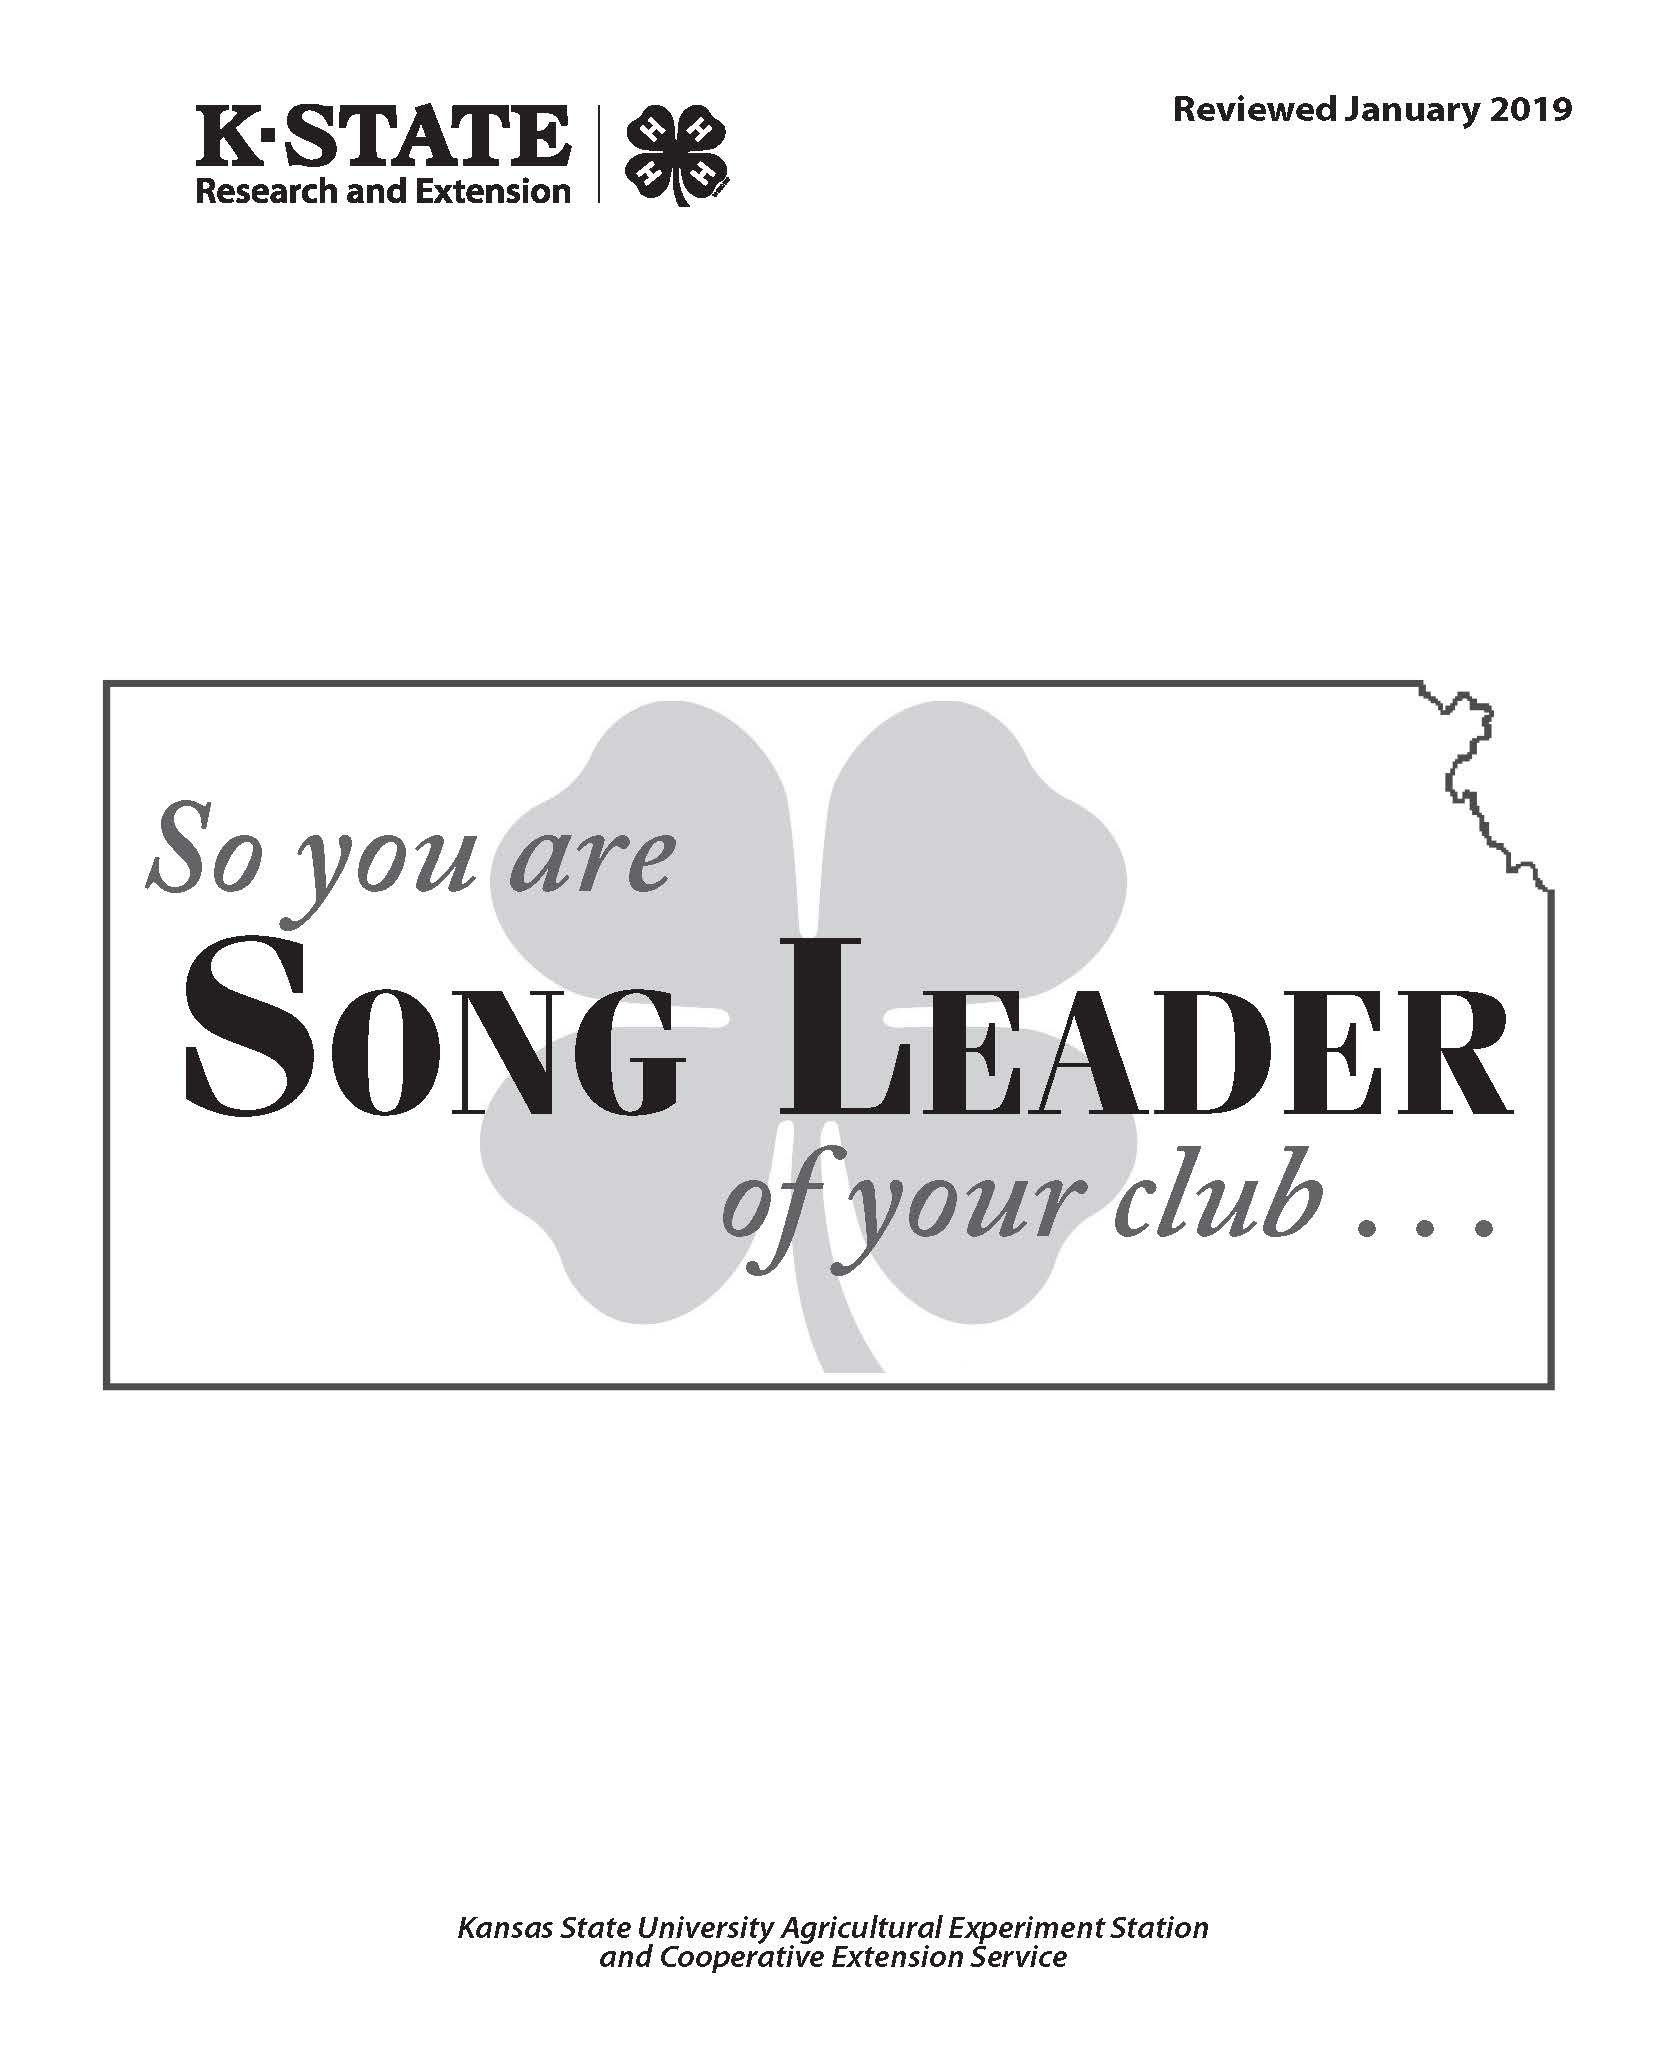 So you are the Song Leader of your club